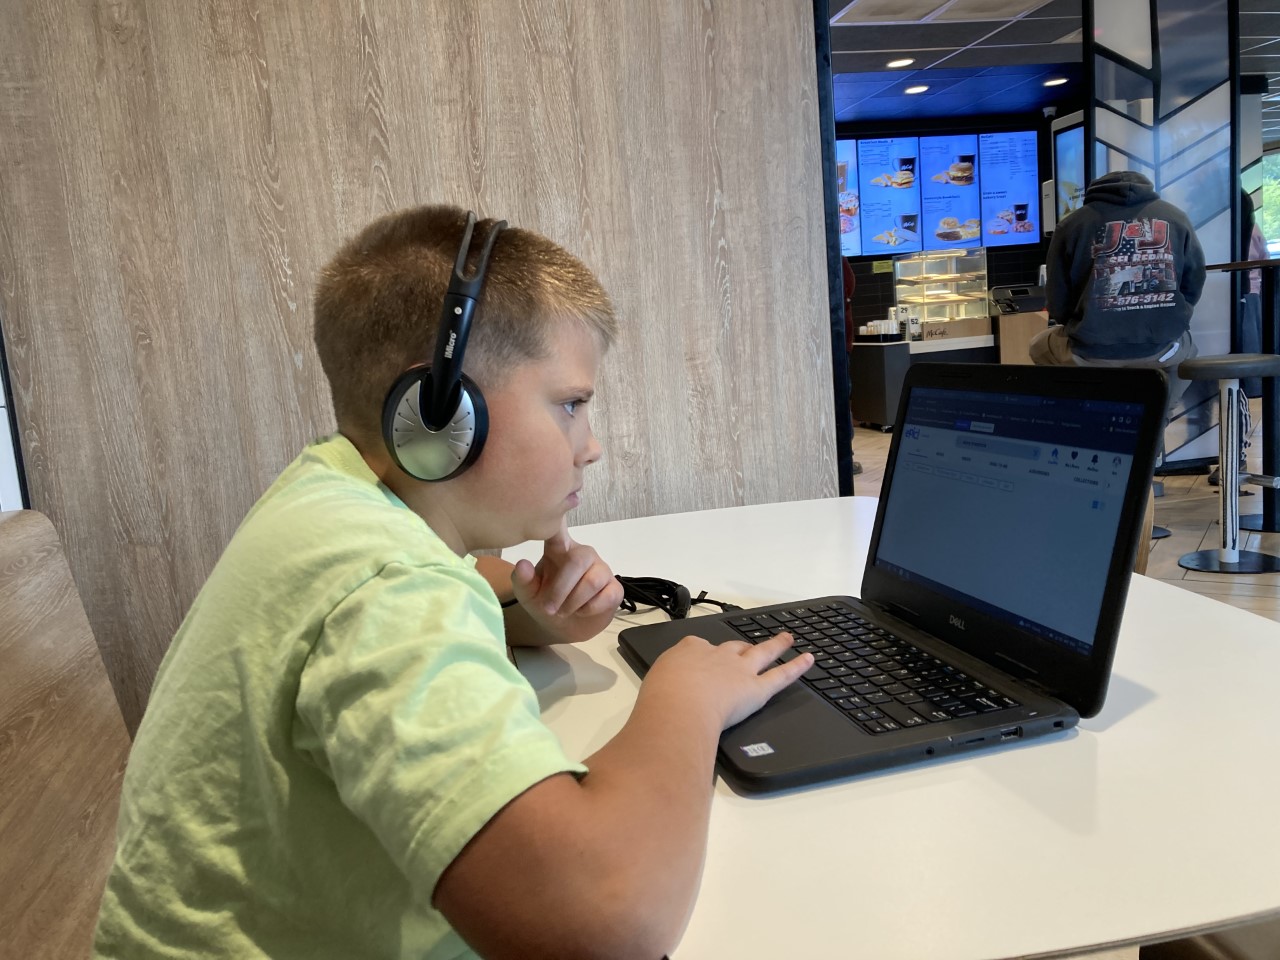 Image of a child learning online in a virtual class on a laptop computer with headphones.